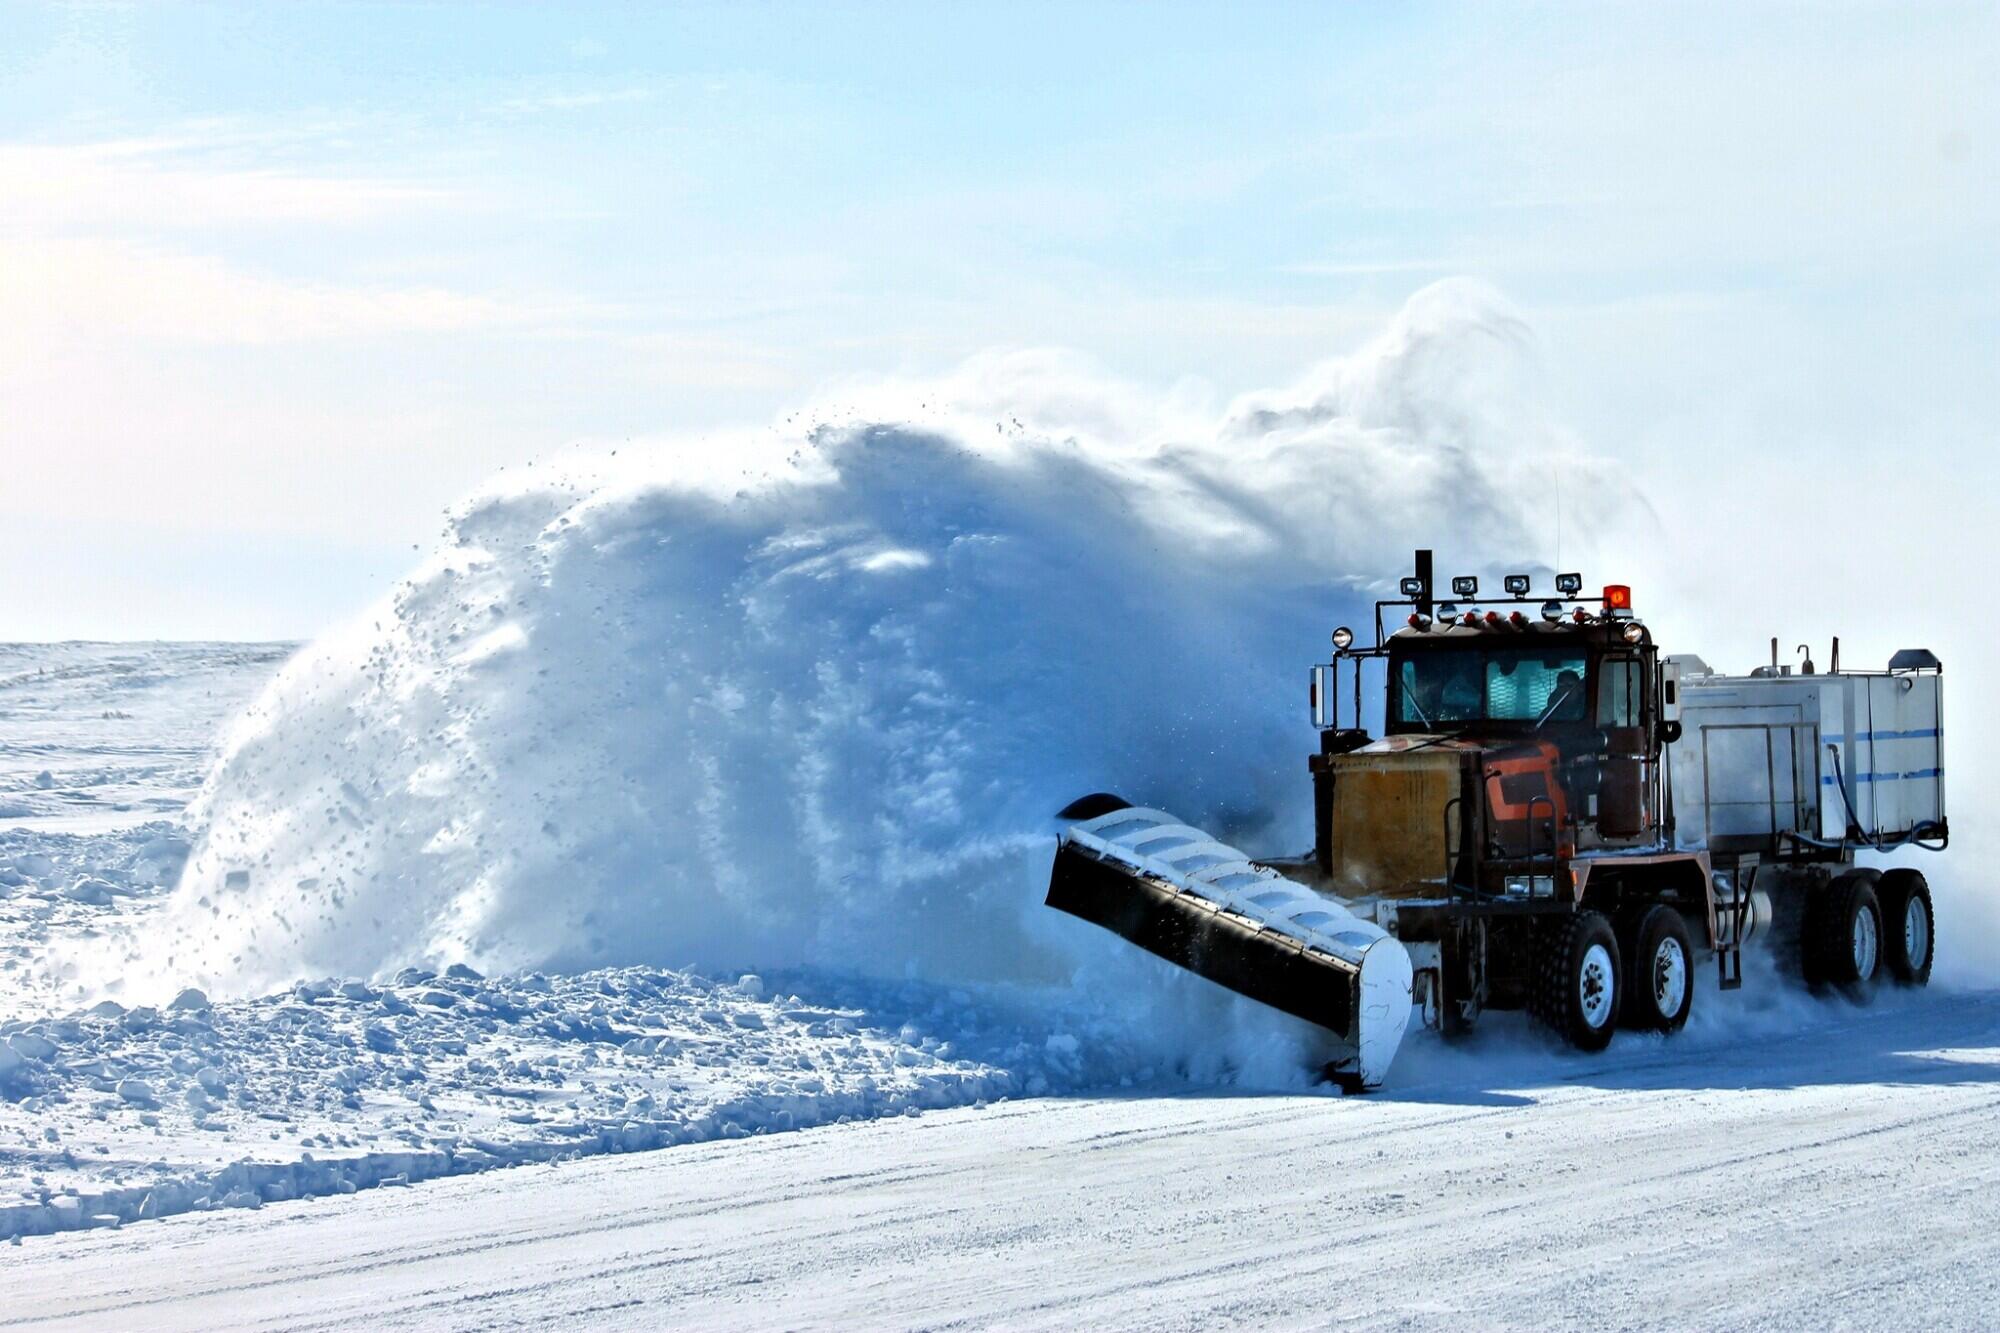 5 Tips for Choosing a Commercial Snow Removal Service in Kensington, MD